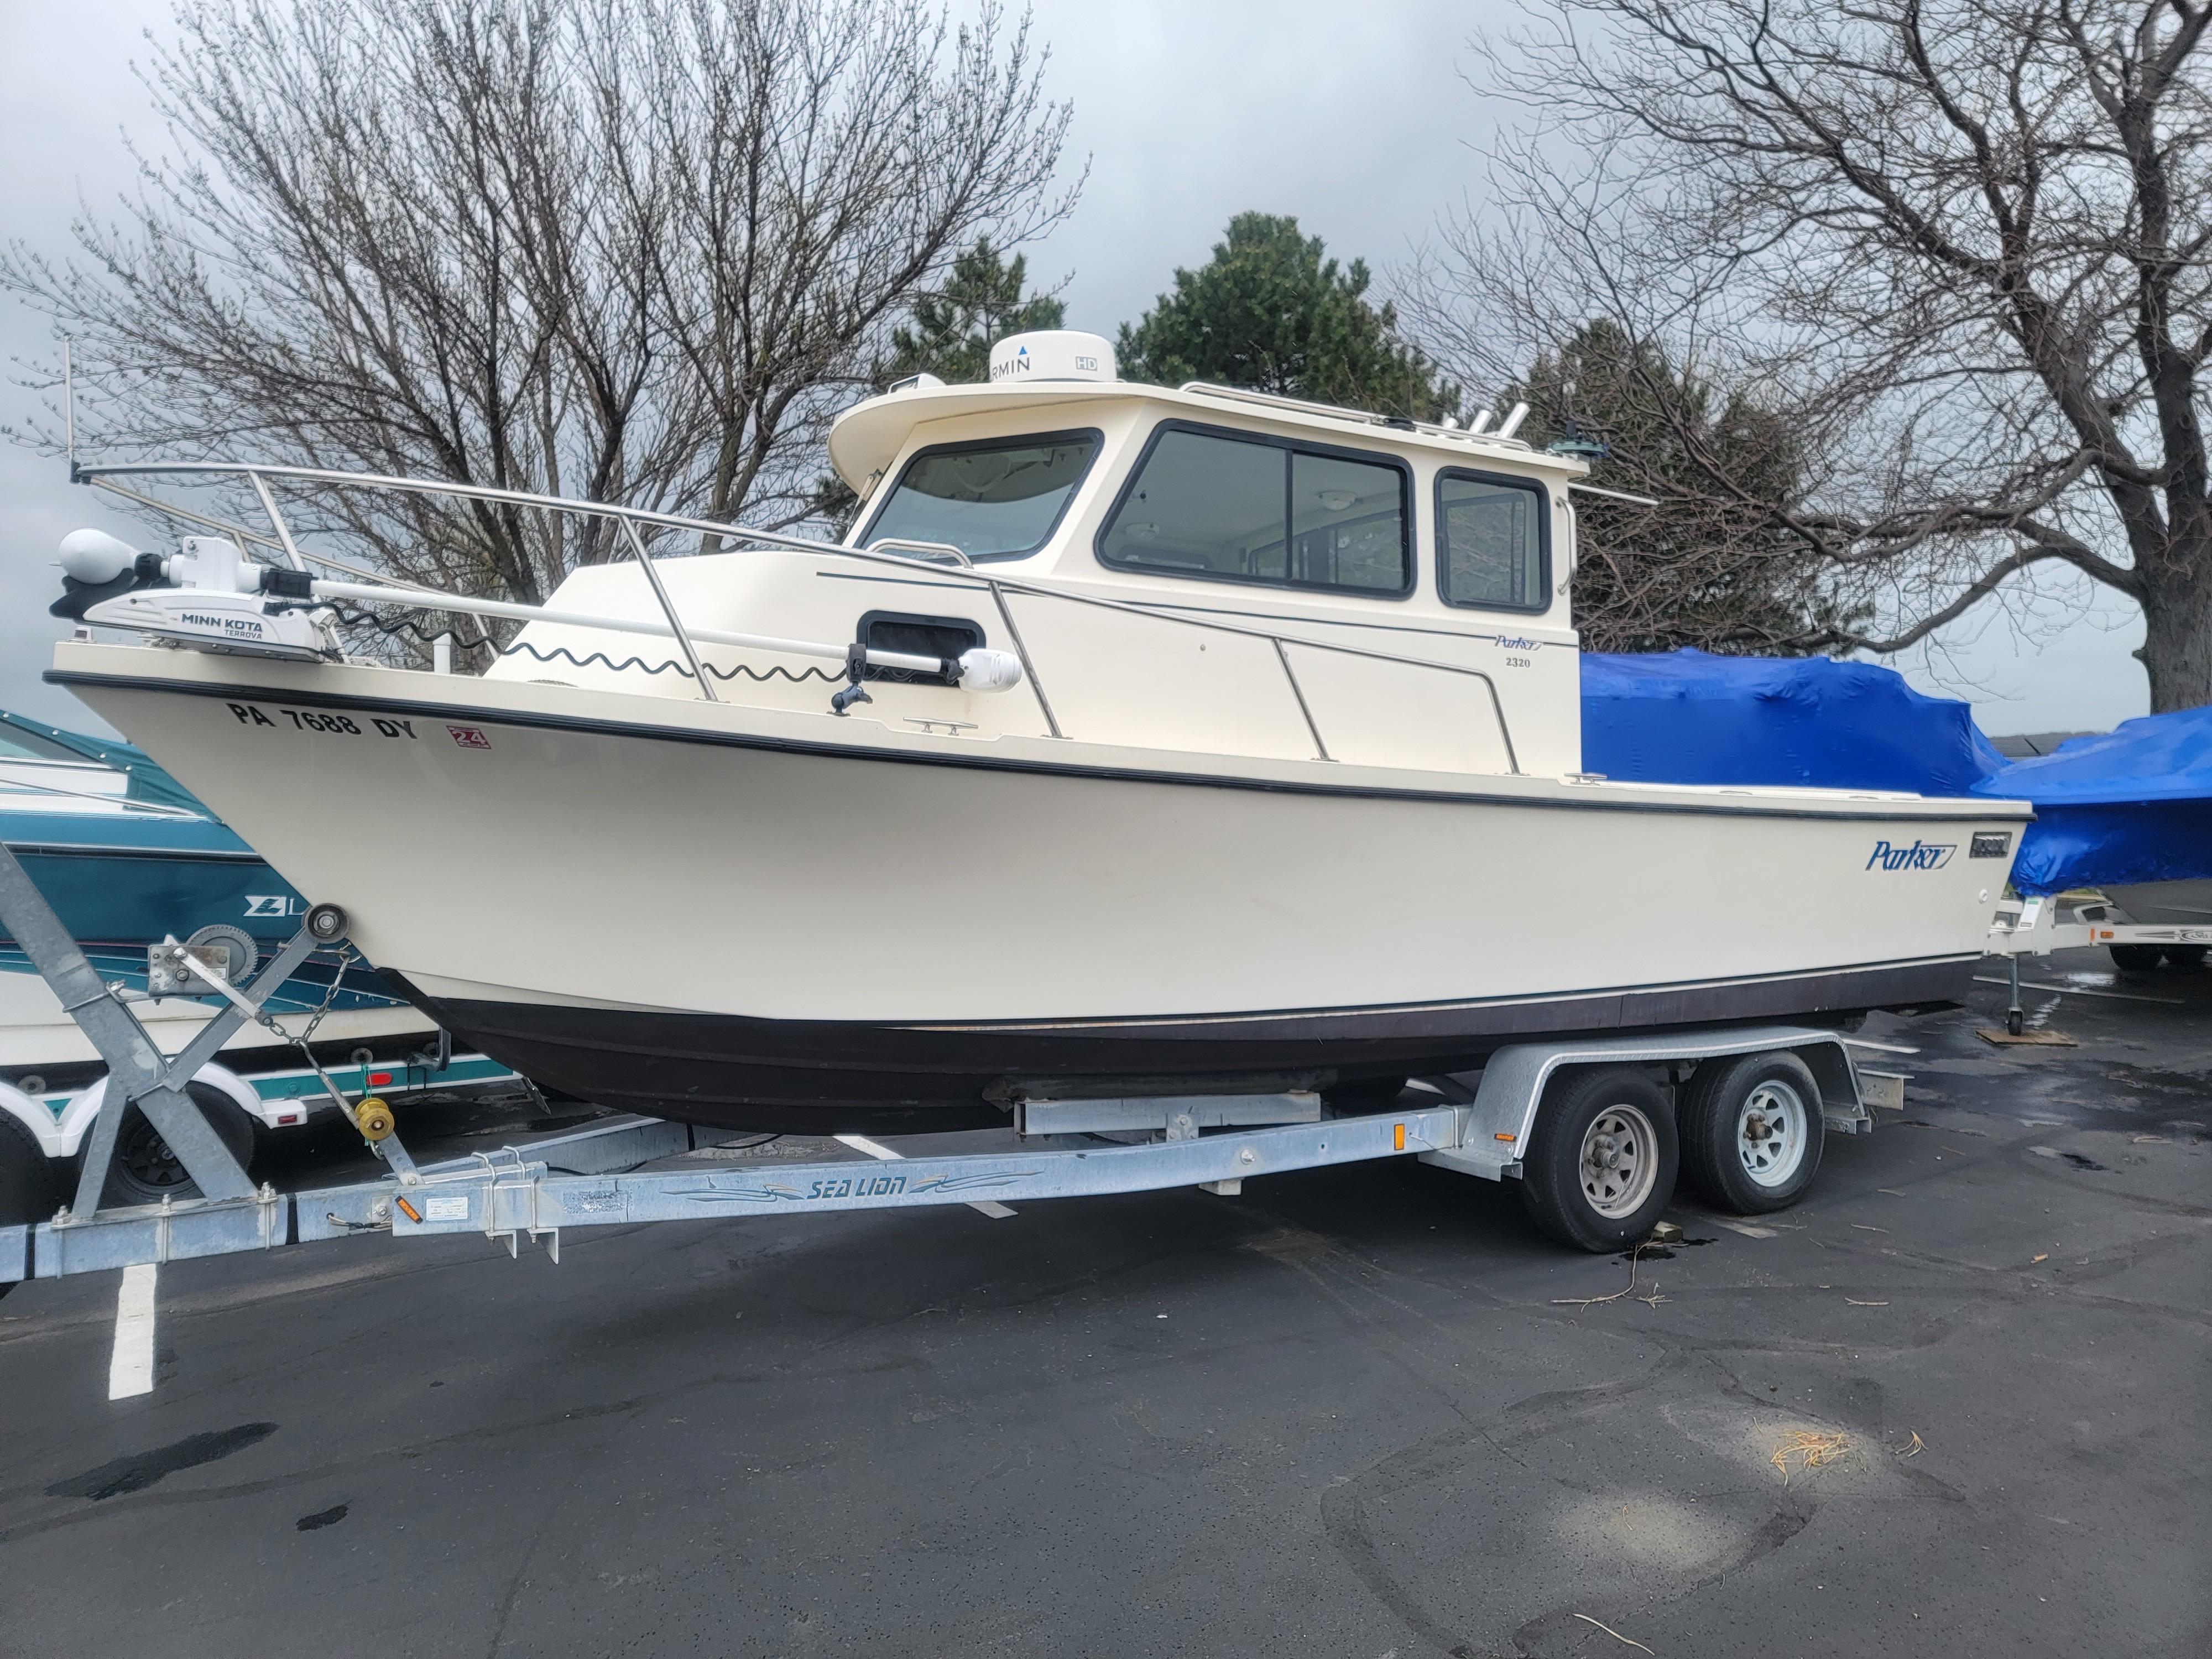 Sport Fishing boats for sale in Pennsylvania - Boat Trader